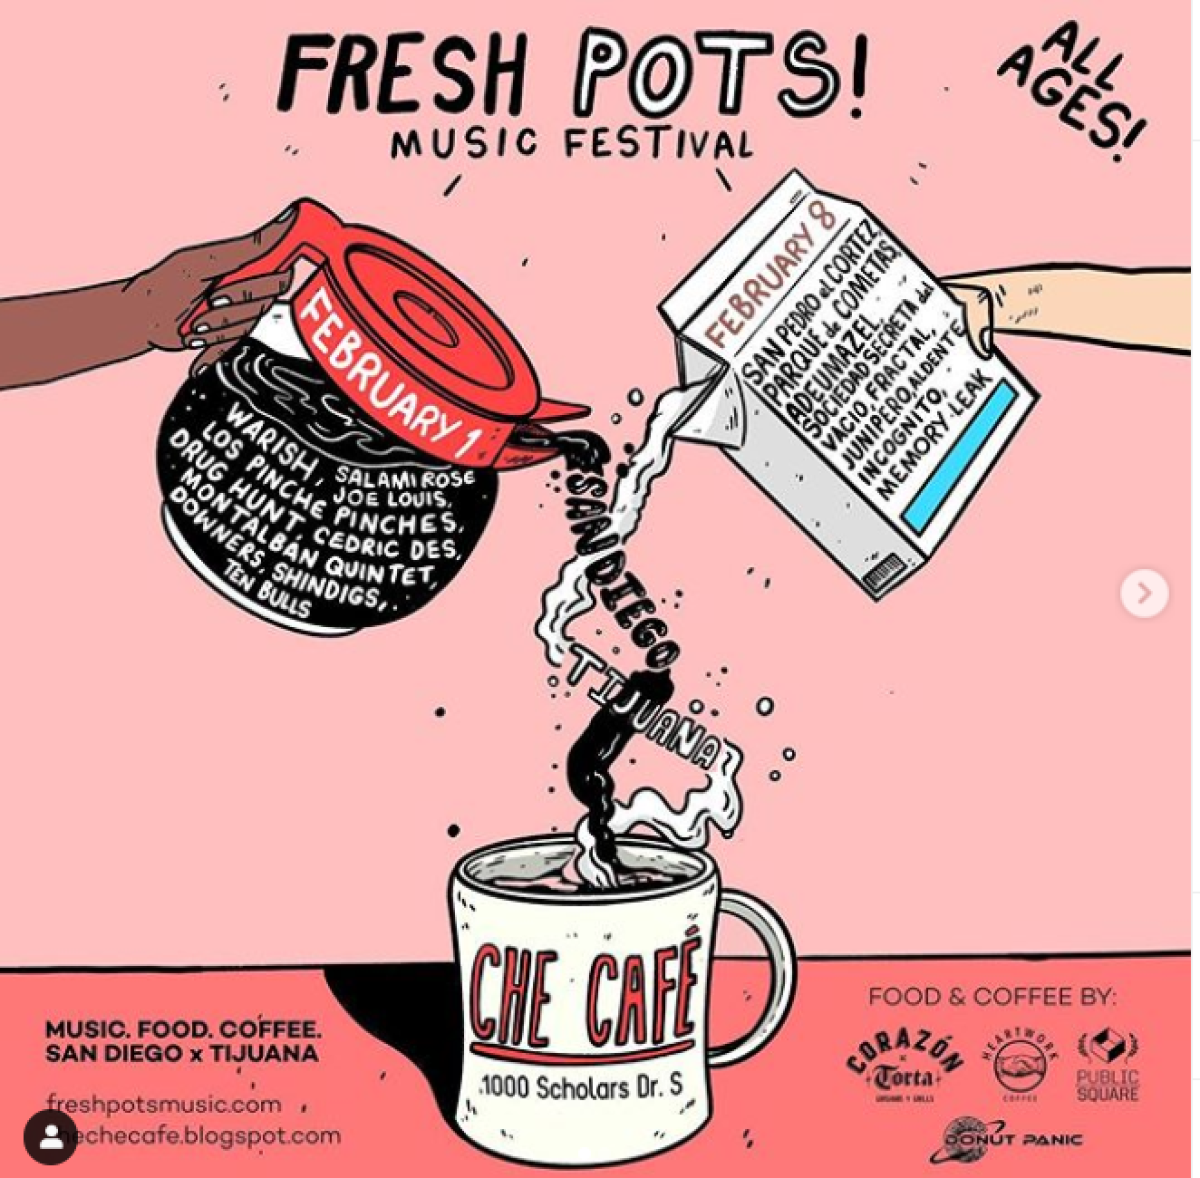 An artistic promotional flyer for Fresh Pots! Music Festival, originally posted on Instagram.